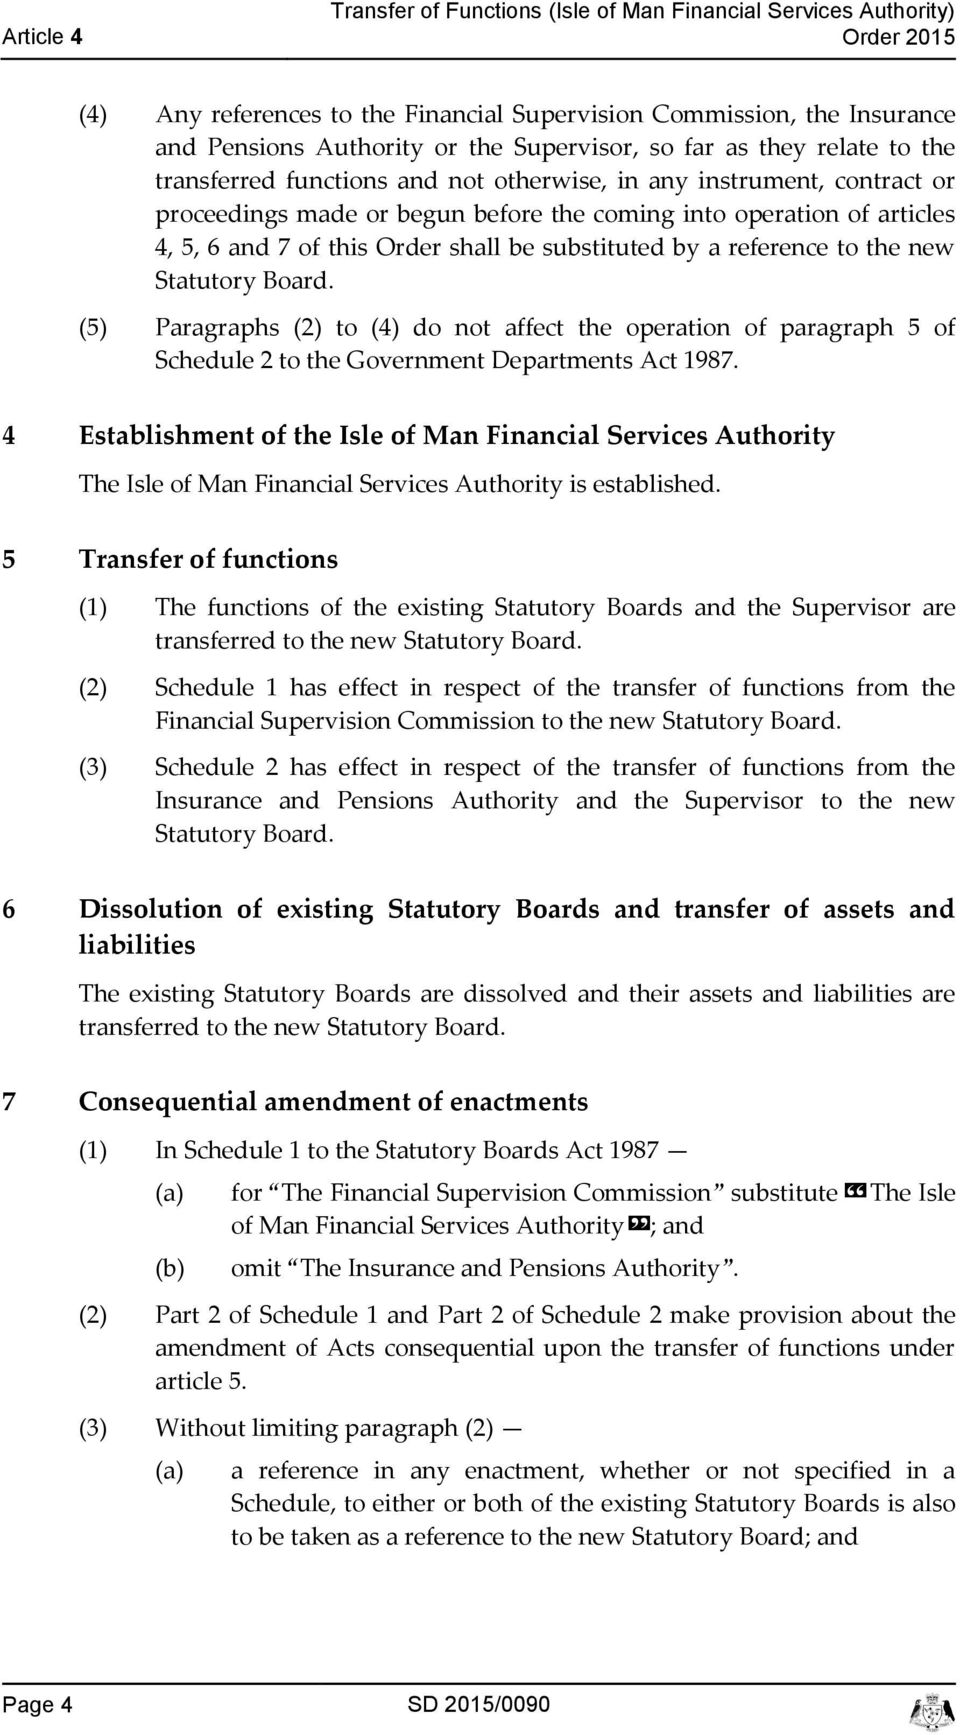 substituted by a referene to the new Statutory Board. (5) Paragraphs (2) to (4) do not affet the operation of paragraph 5 of Shedule 2 to the Government Departments At 1987.